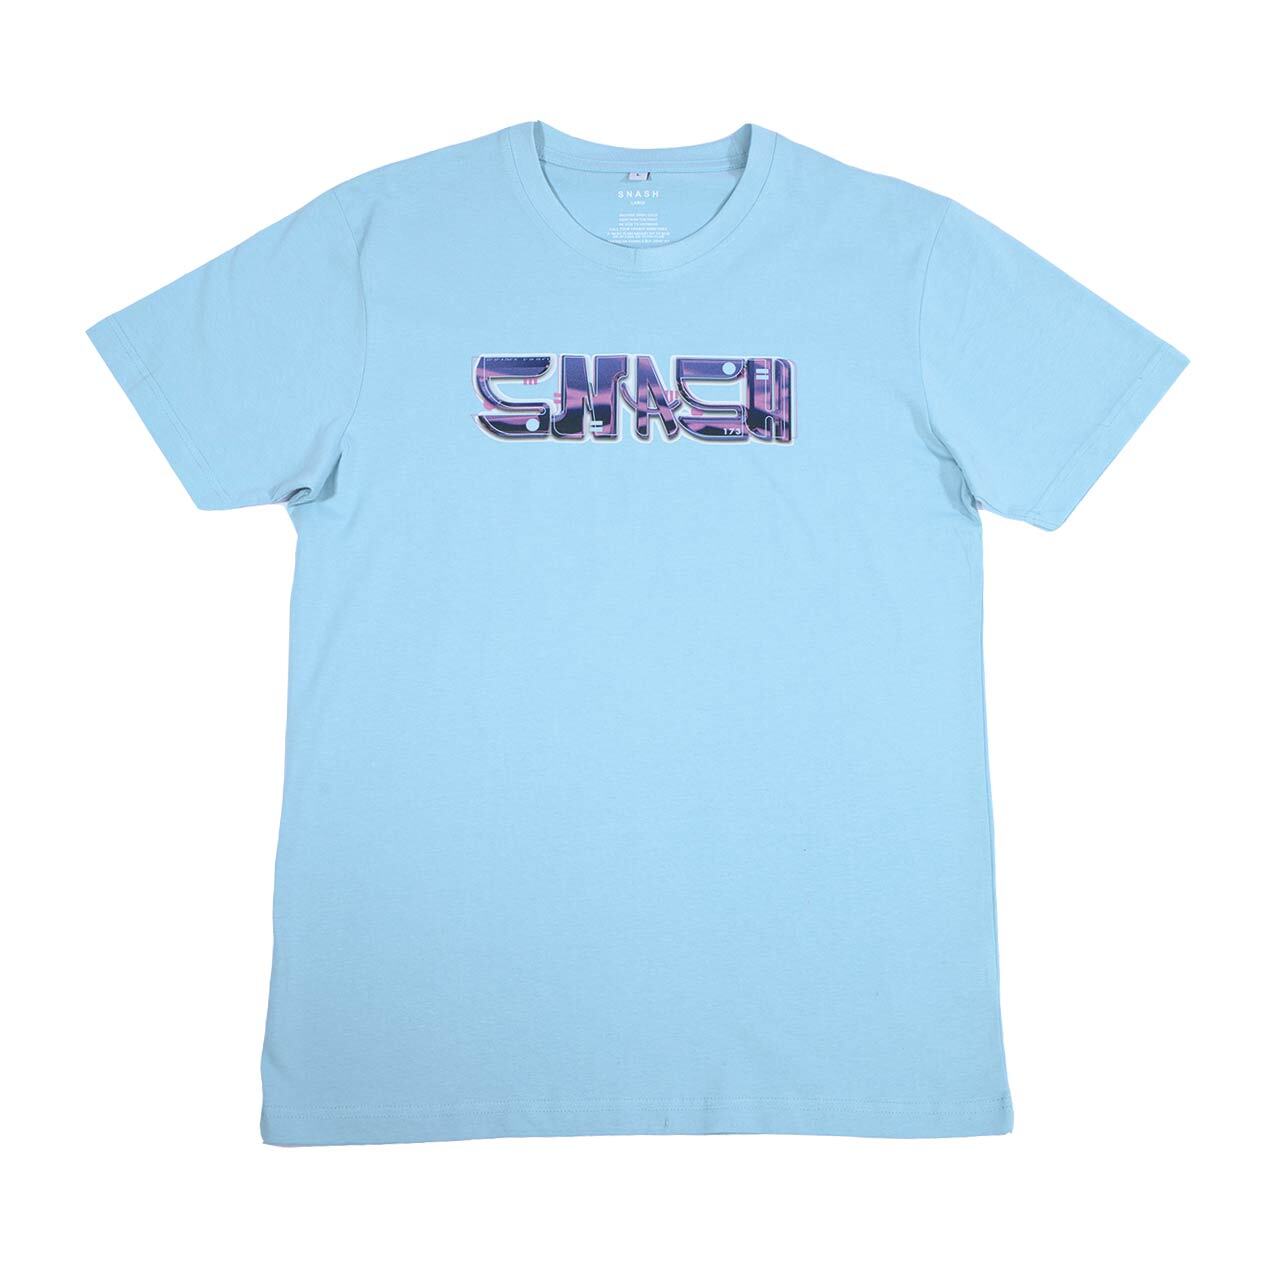 Snash - The New Tokyo 173 T-Shirt